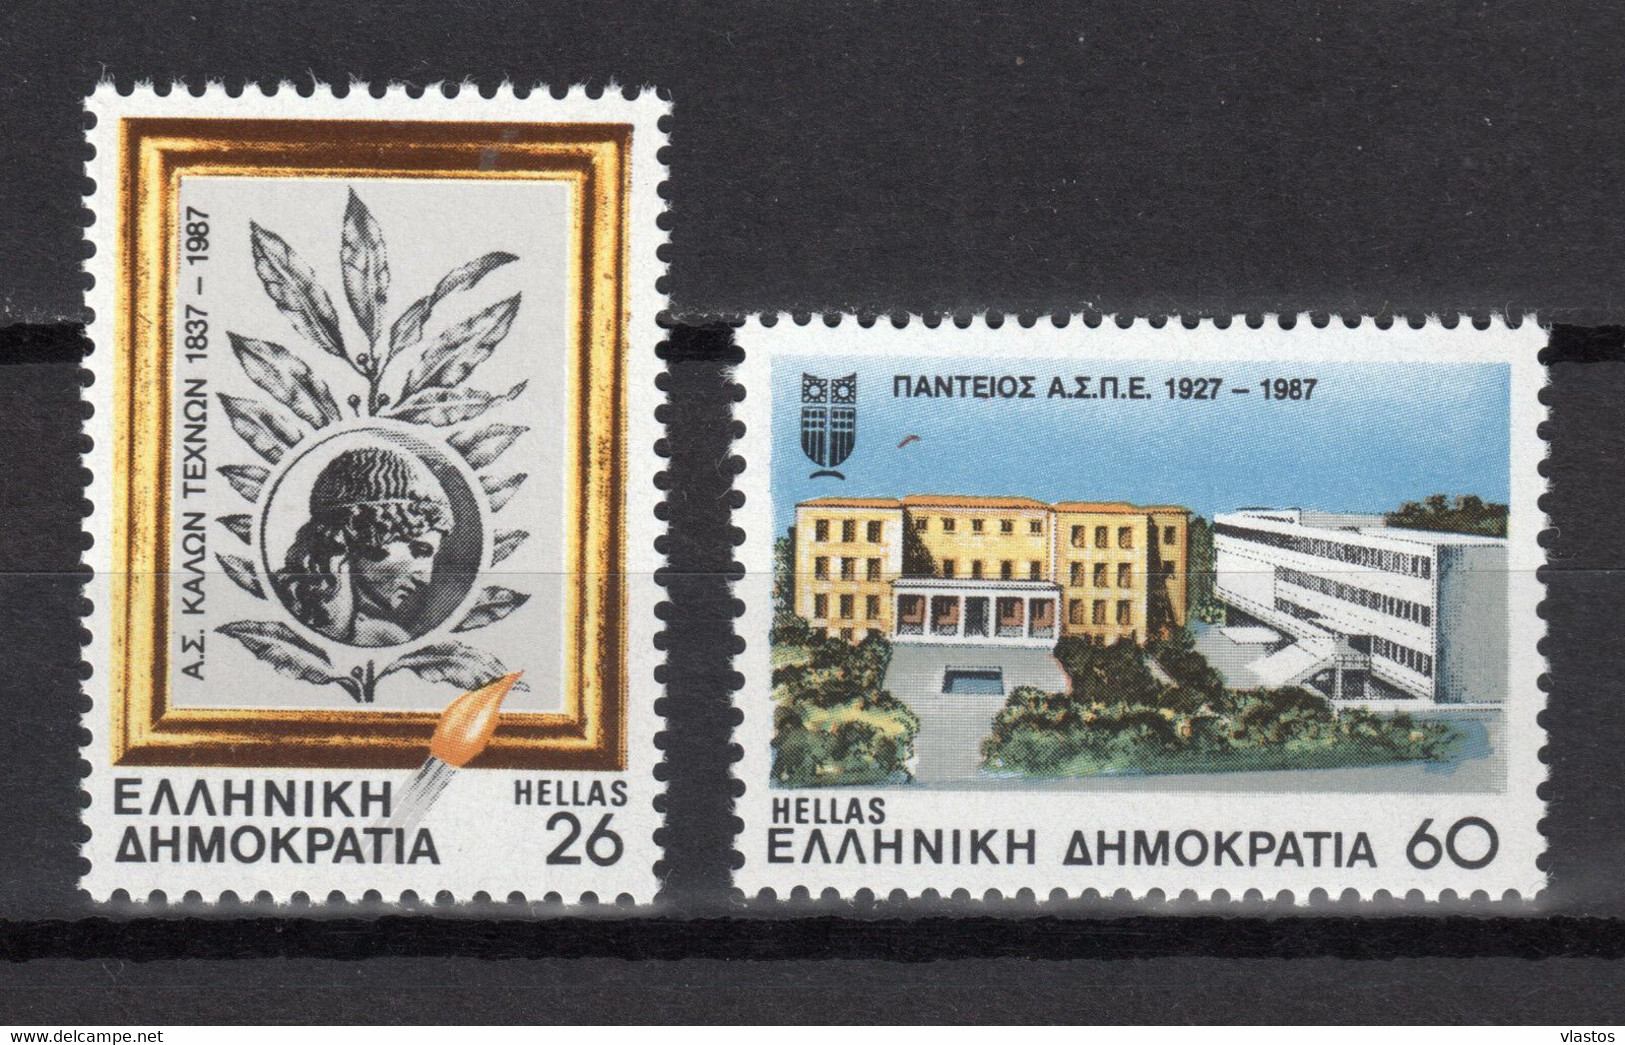 GREECE 1987 COMPLETE YEAR - PERFORATED STAMPS MNH